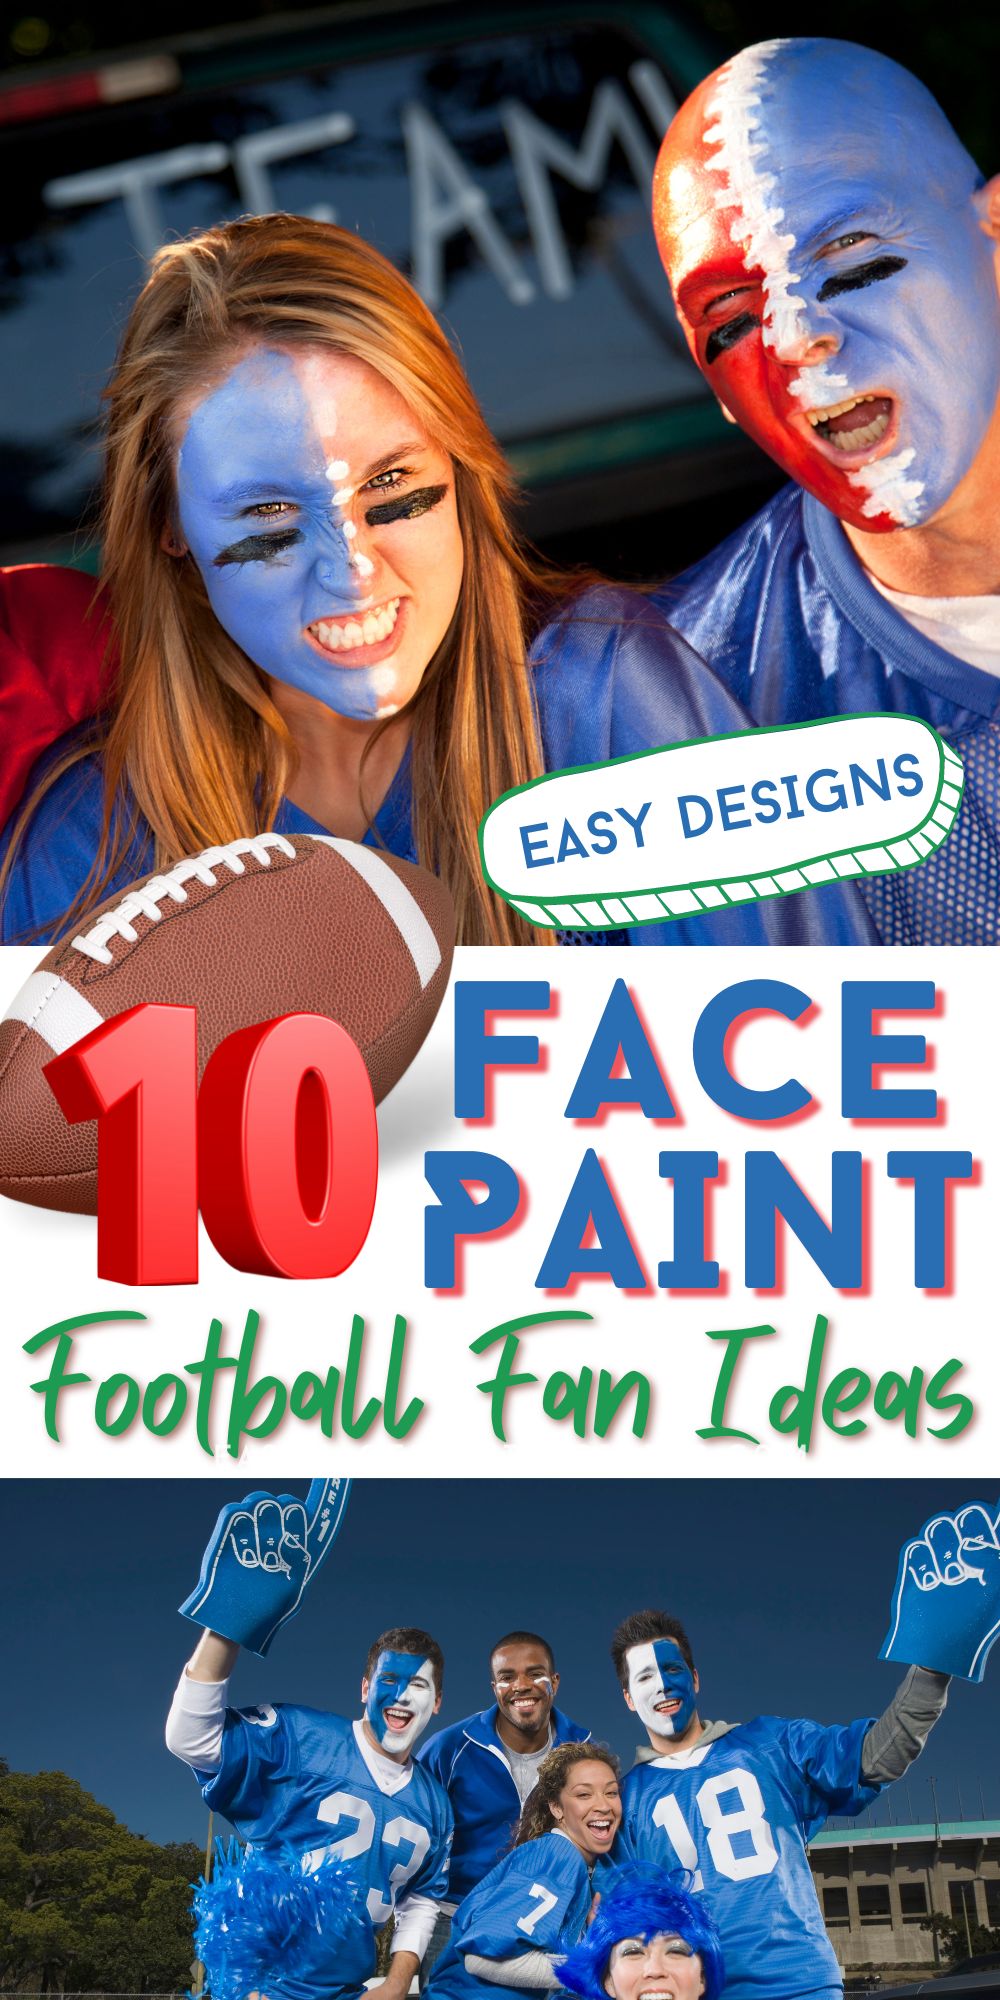 collage image of football fans with their faces painted. An overlay reaads, "10 Face Paint Football Fan Ideas"